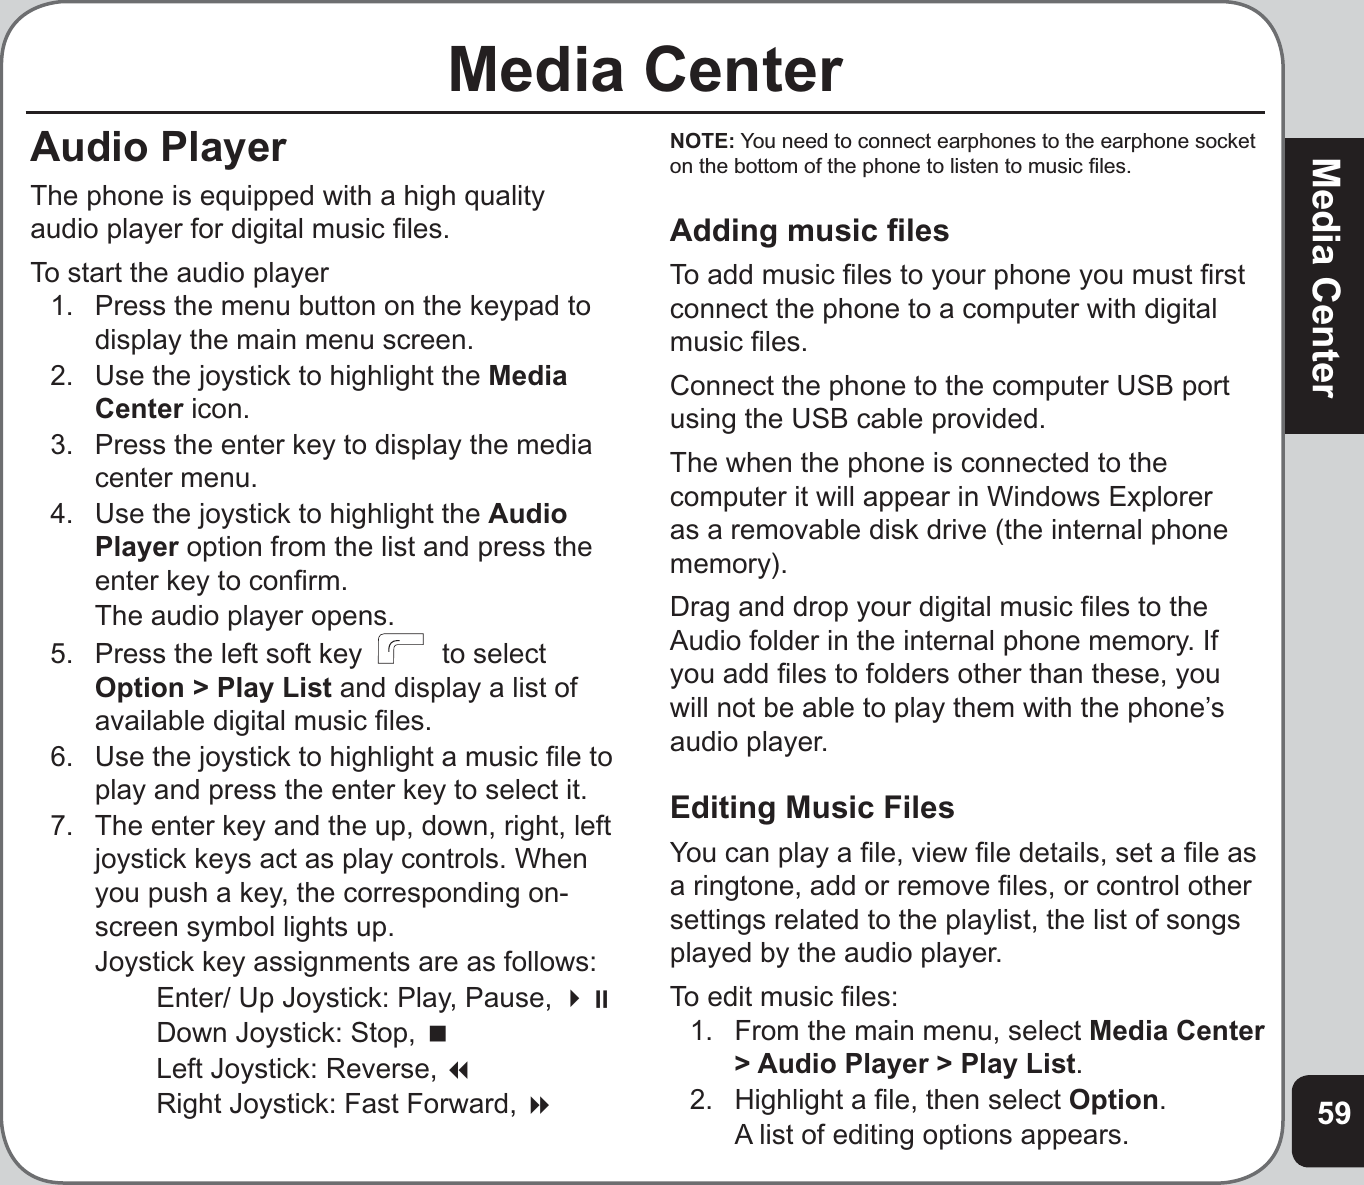 59Media CenterMedia CenterAudio PlayerThe phone is equipped with a high quality audio player for digital music ﬁ les.To start the audio player1.  Press the menu button on the keypad to display the main menu screen.2.  Use the joystick to highlight the MediaCenter icon.3.  Press the enter key to display the media center menu.4.  Use the joystick to highlight the AudioPlayer option from the list and press the enter key to conﬁ rm.  The audio player opens.5.  Press the left soft key    to select Option &gt; Play List and display a list of available digital music ﬁ les.6.  Use the joystick to highlight a music ﬁ le to play and press the enter key to select it.7.   The enter key and the up, down, right, left joystick keys act as play controls. When you push a key, the corresponding on-screen symbol lights up.   Joystick key assignments are as follows:    Enter/ Up Joystick: Play, Pause,     Down Joystick: Stop,     Left Joystick: Reverse,     Right Joystick: Fast Forward, NOTE: You need to connect earphones to the earphone socket on the bottom of the phone to listen to music ﬁ les.Adding music ﬁ lesTo add music ﬁ les to your phone you must ﬁ rst connect the phone to a computer with digital music ﬁ les.Connect the phone to the computer USB port using the USB cable provided.The when the phone is connected to the computer it will appear in Windows Explorer as a removable disk drive (the internal phone memory).Drag and drop your digital music ﬁ les to the Audio folder in the internal phone memory. If you add ﬁ les to folders other than these, you will not be able to play them with the phone’s audio player.Editing Music FilesYou can play a ﬁ le, view ﬁ le details, set a ﬁ le as a ringtone, add or remove ﬁ les, or control other settings related to the playlist, the list of songs played by the audio player. To edit music ﬁ les:1.   From the main menu, select Media Center &gt; Audio Player &gt; Play List.2.  Highlight a ﬁ le, then select Option.  A list of editing options appears. 